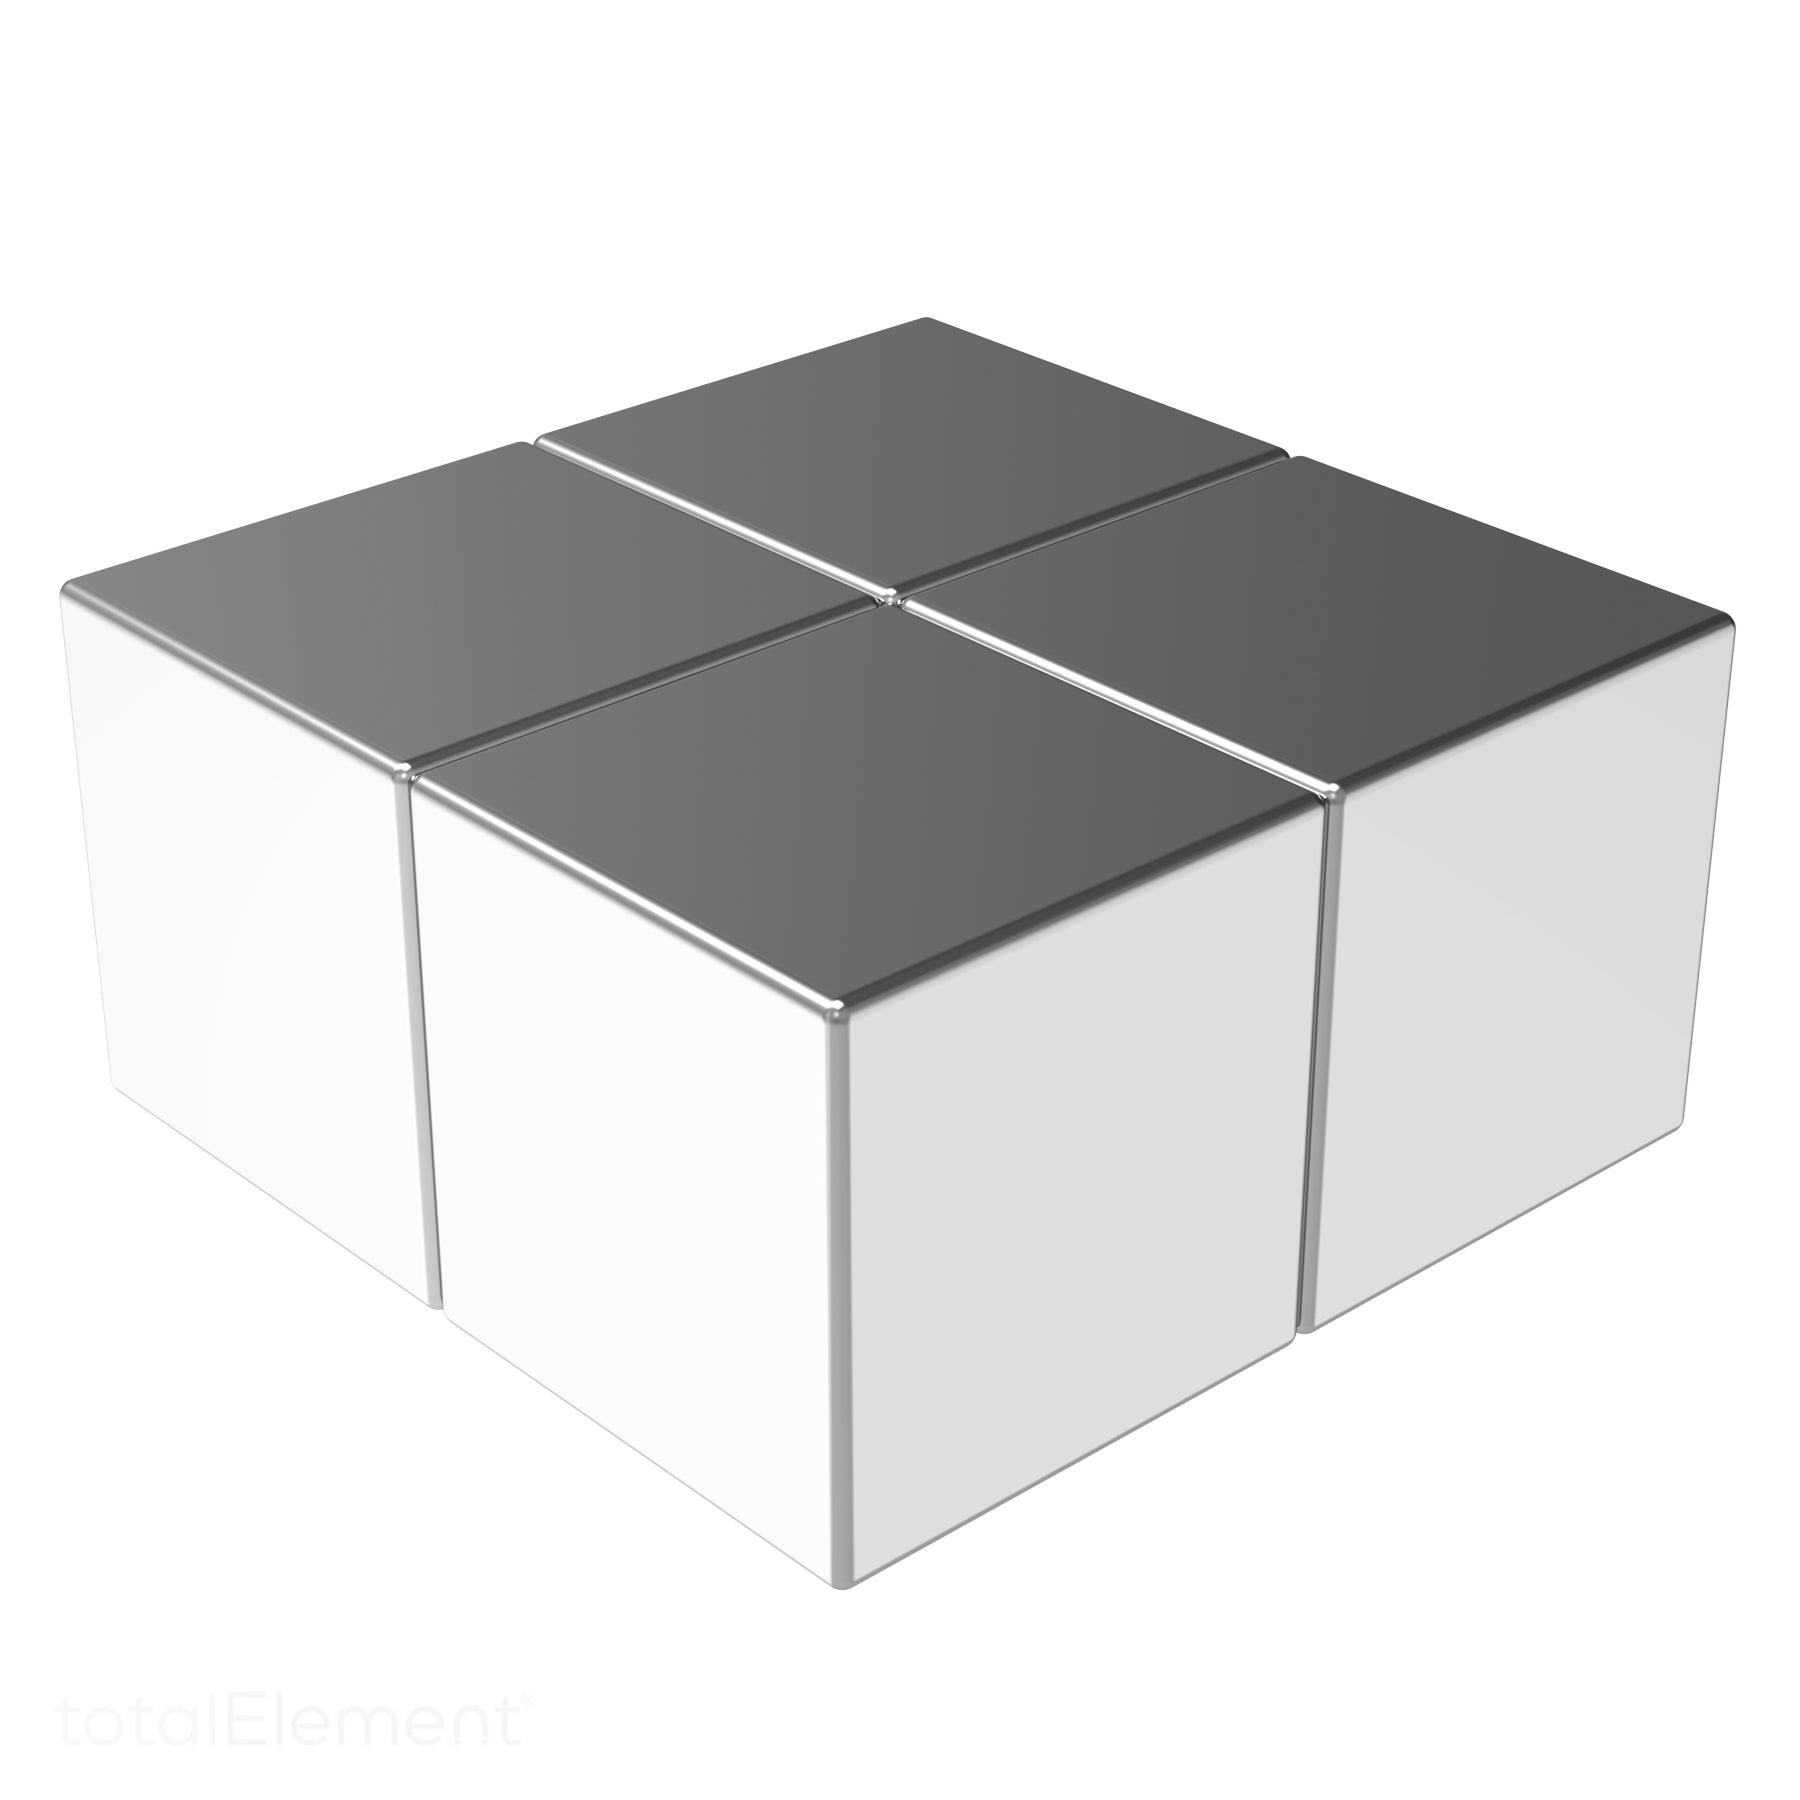 Cube Supplier - MPCO Magnets